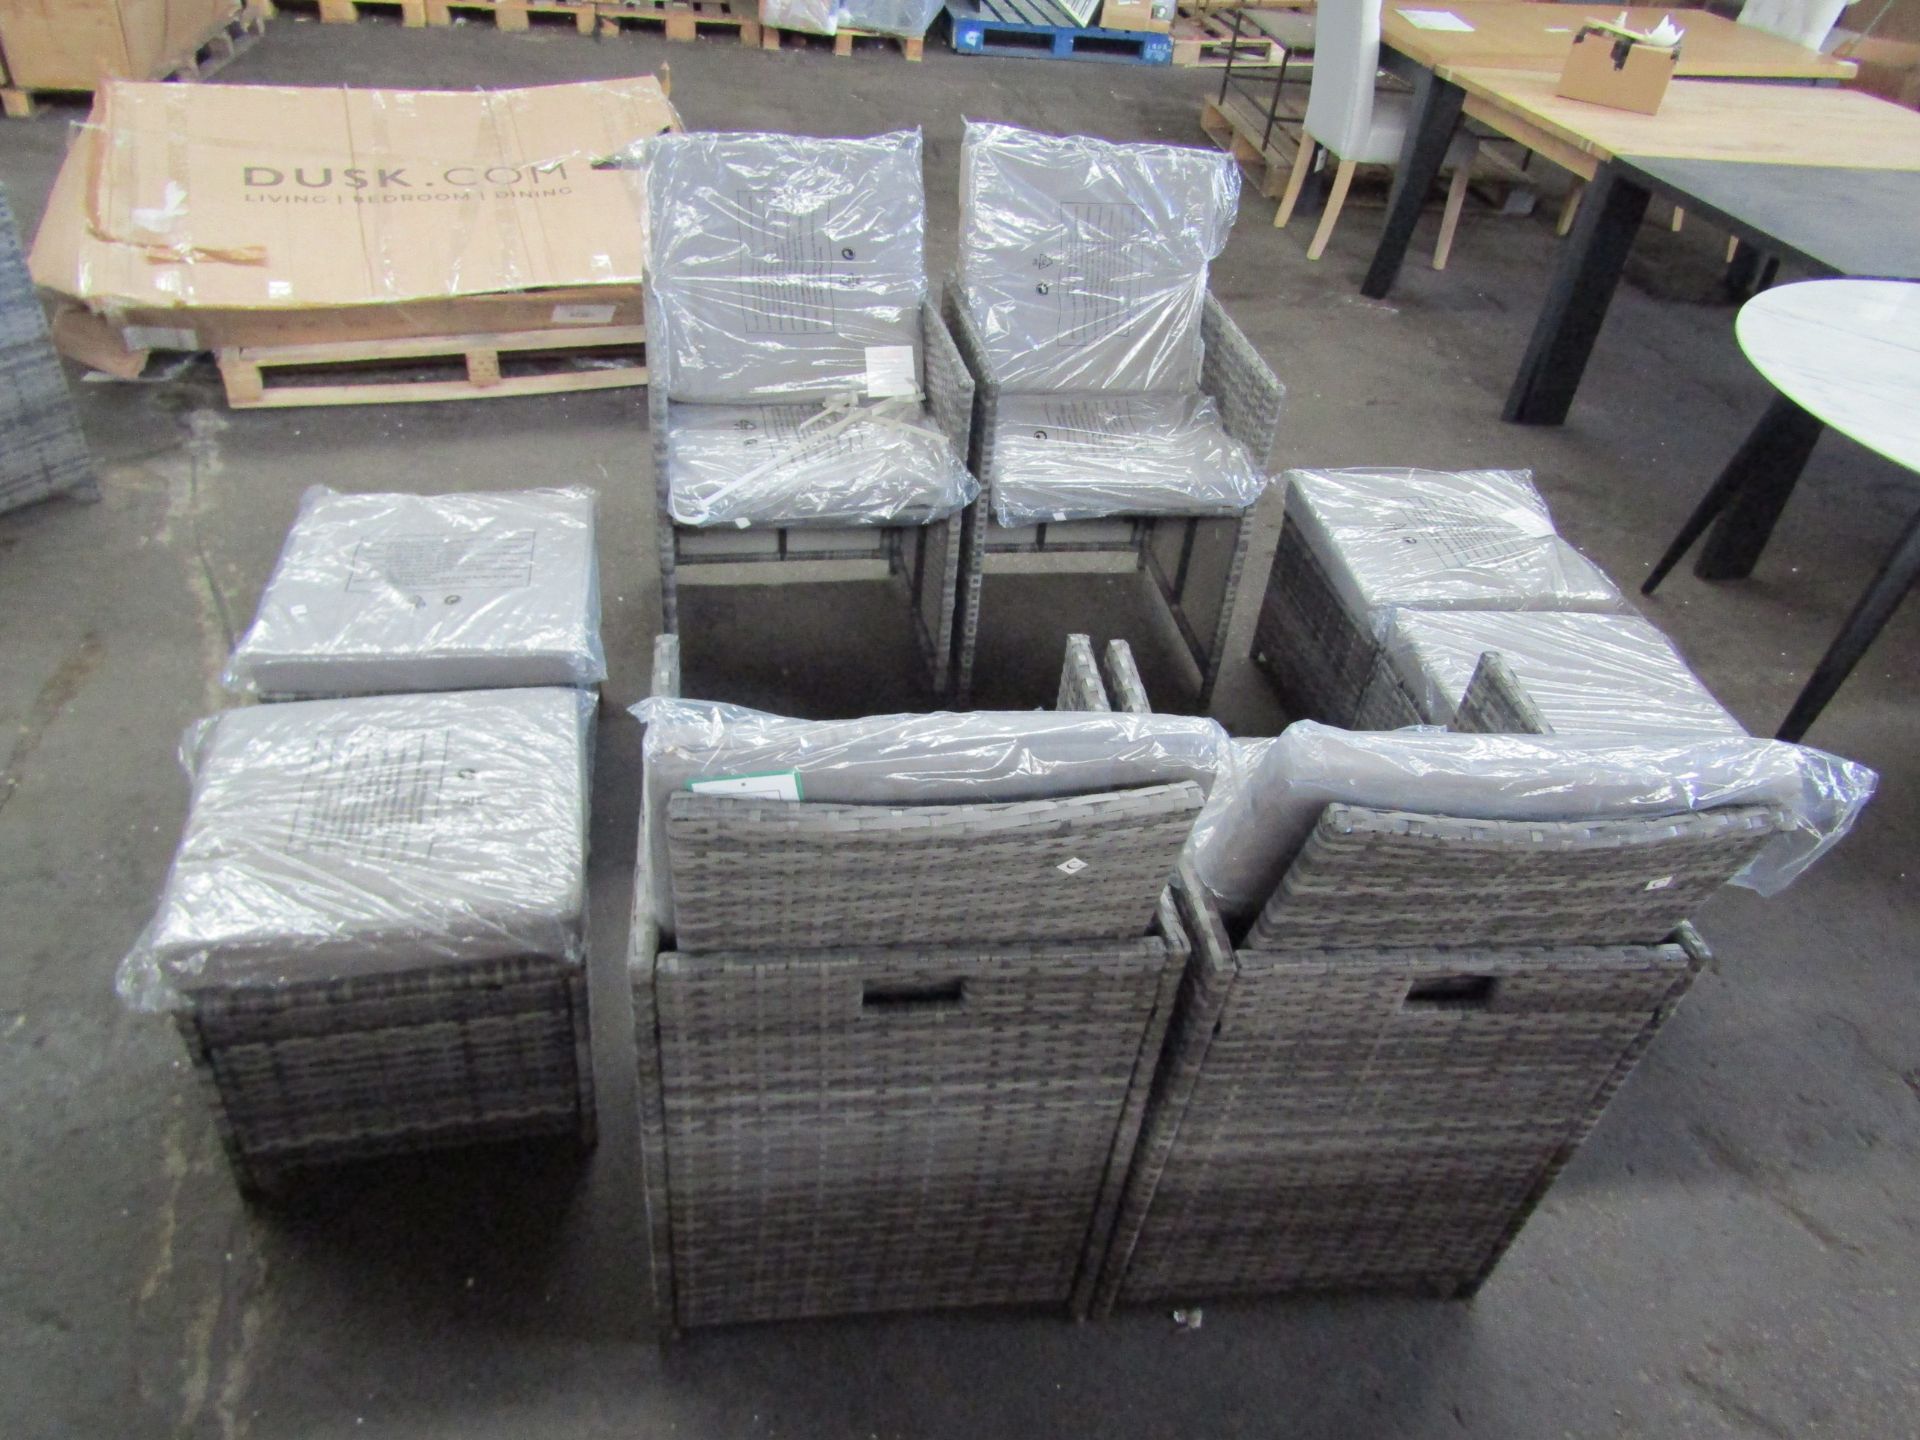 2 x Furniture Online Ex-Retail Customer Returns Mixed Lot - Total RRP est. 866 About the Product(